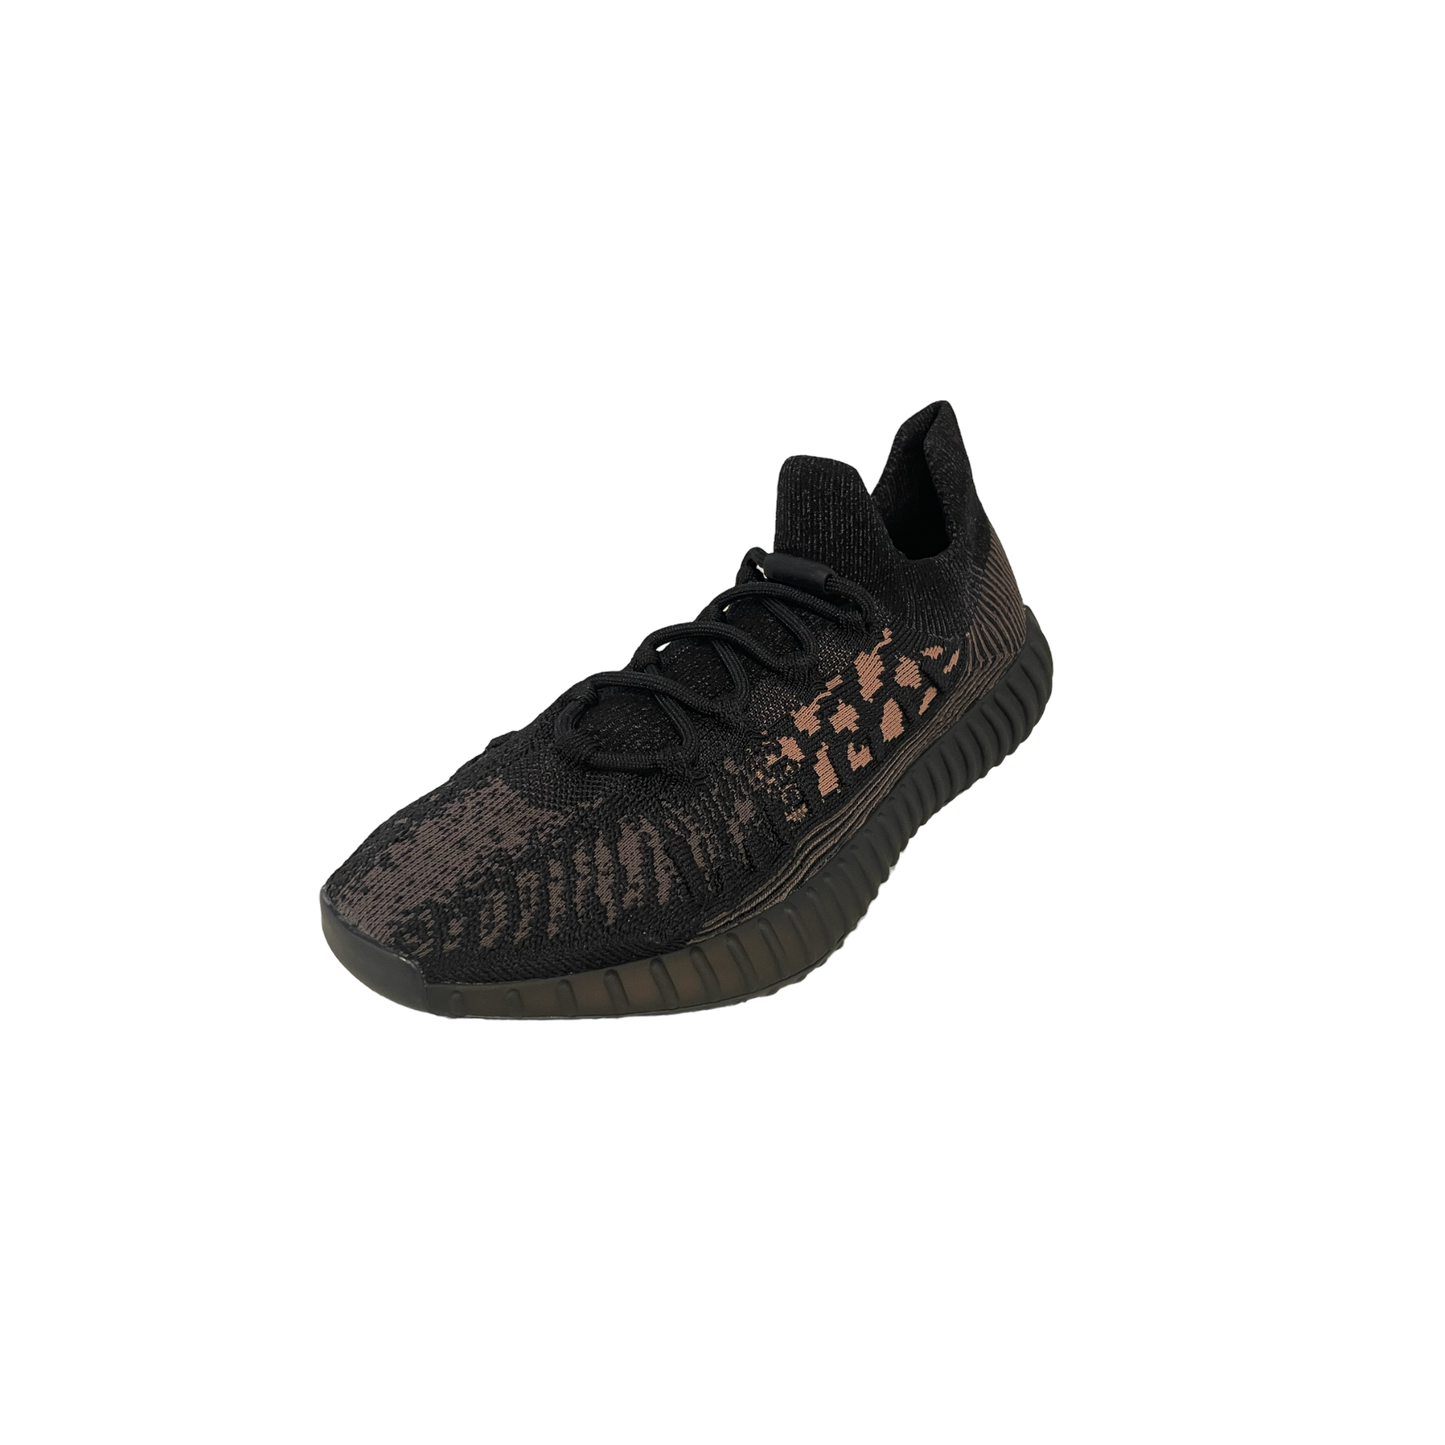 Adidas Yeezy Boost 350 V2 Compact Slate Carbon